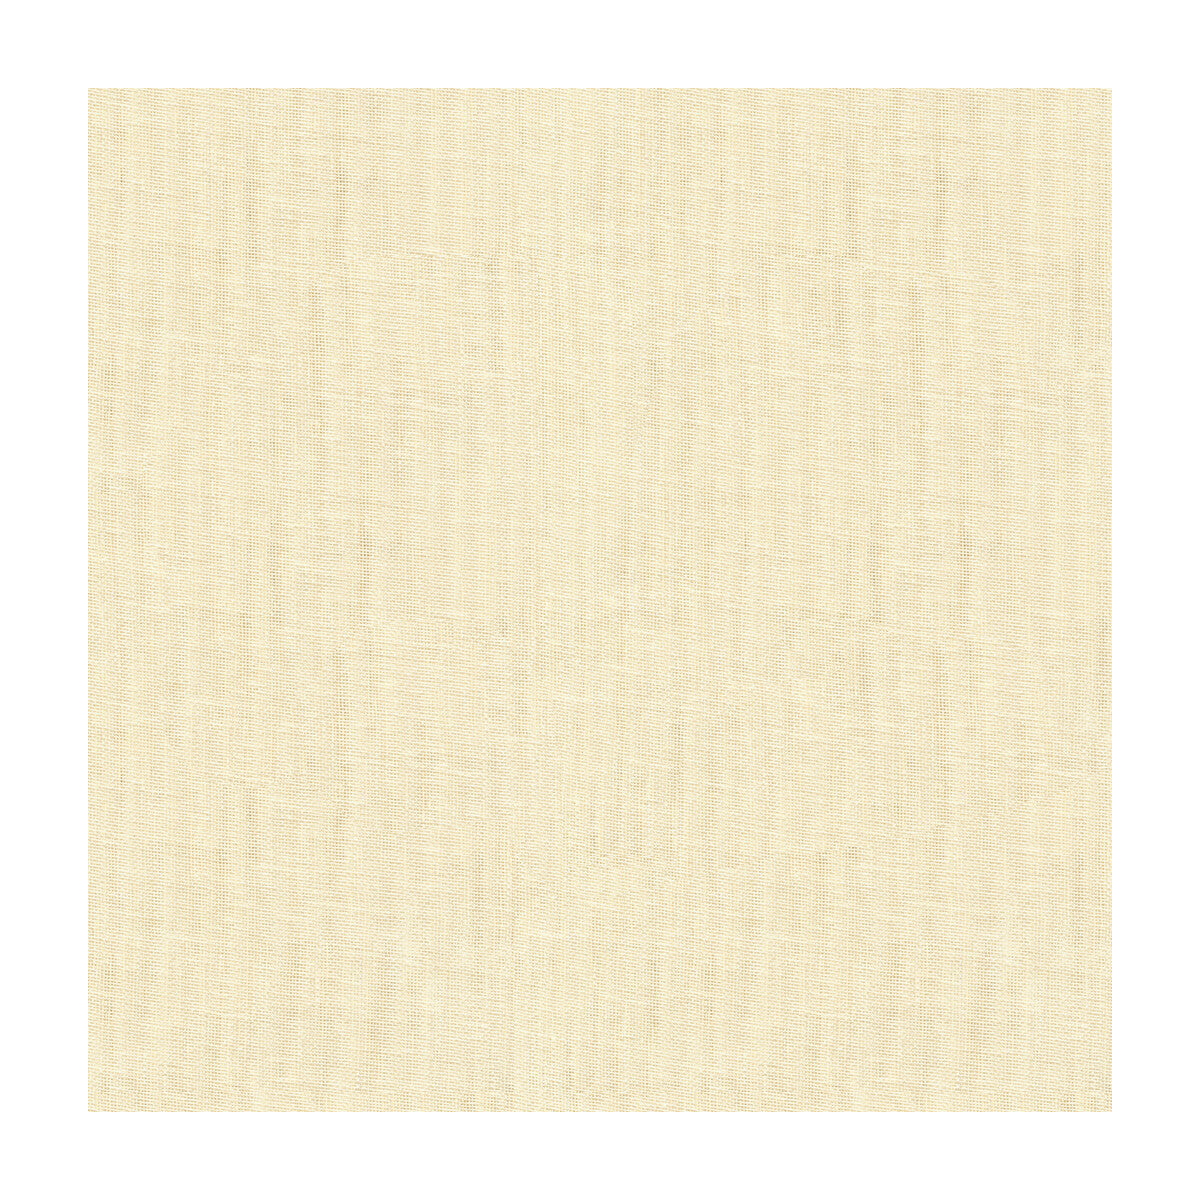 Kravet Contract fabric in 4155-1 color - pattern 4155.1.0 - by Kravet Contract